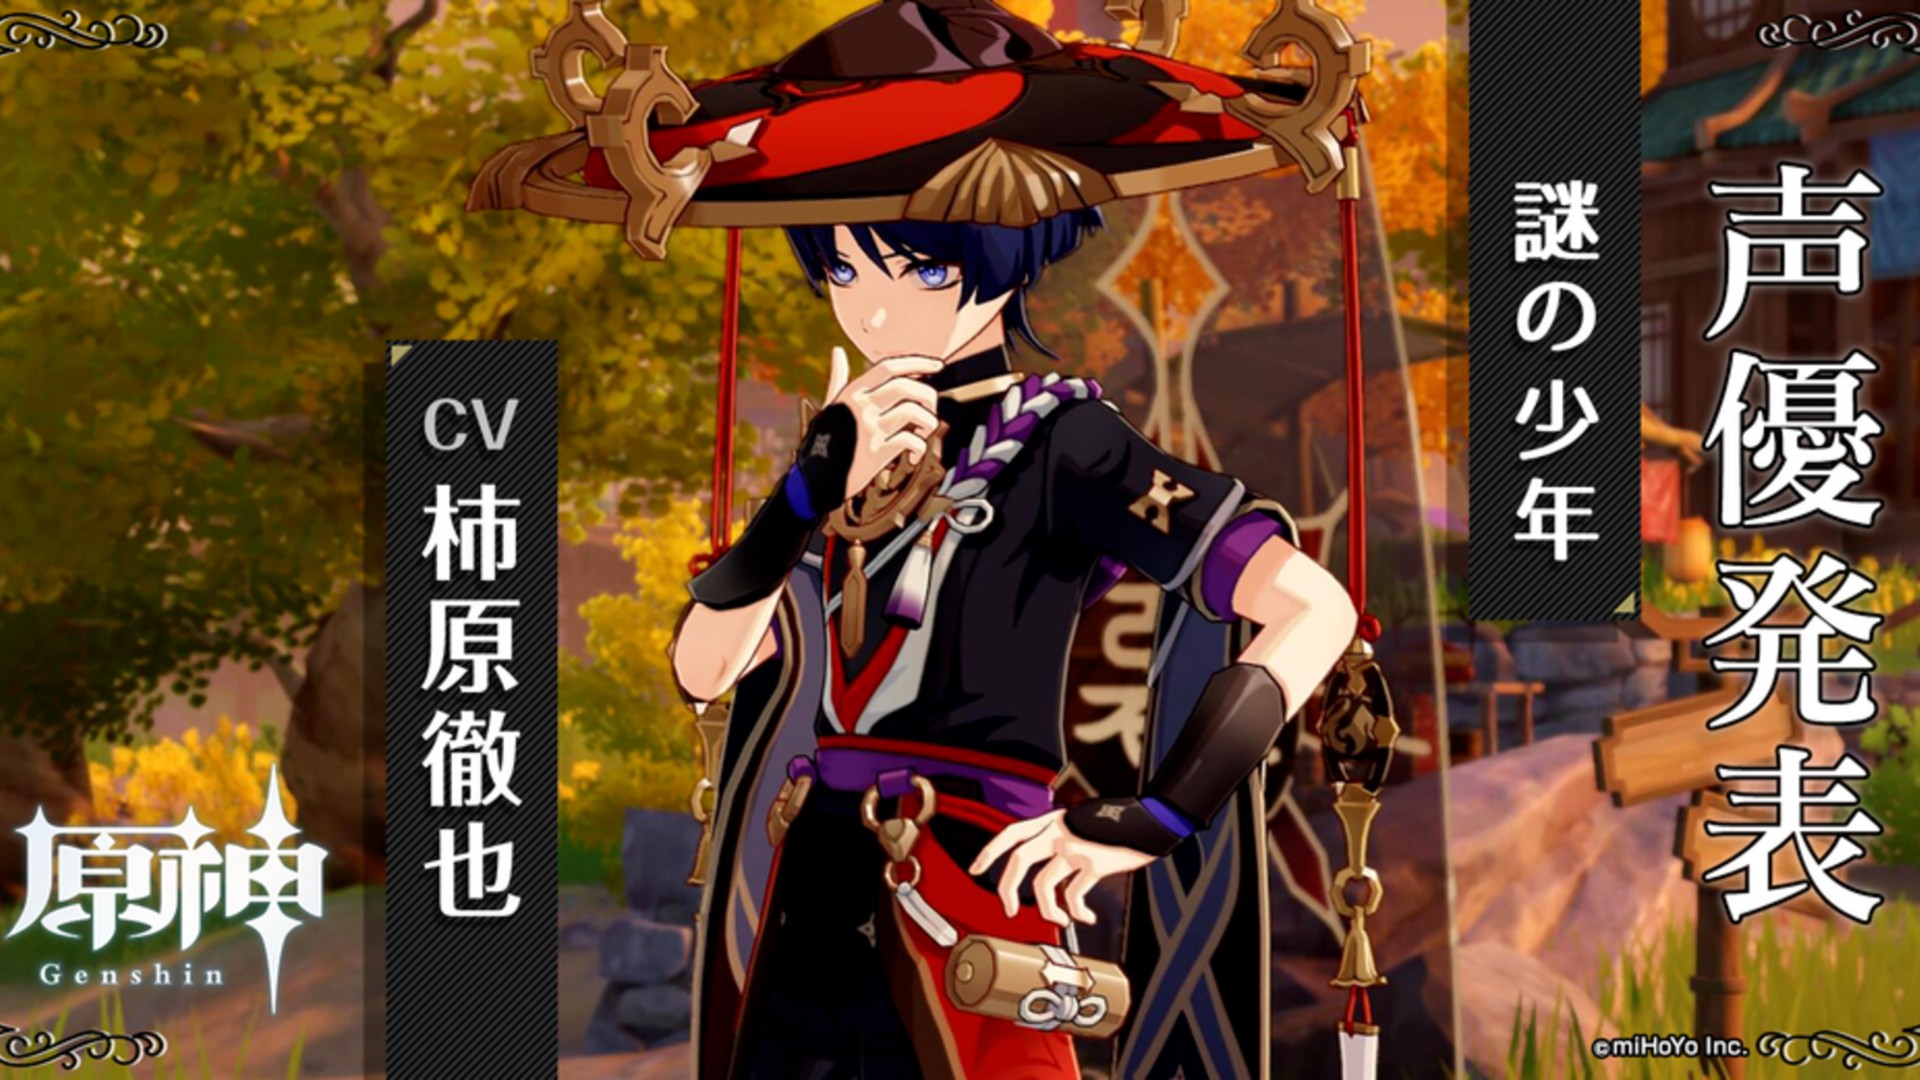 Potential new Genshin Impact character Scaramouche strokes his chin thoughtfully while standing near a temple 